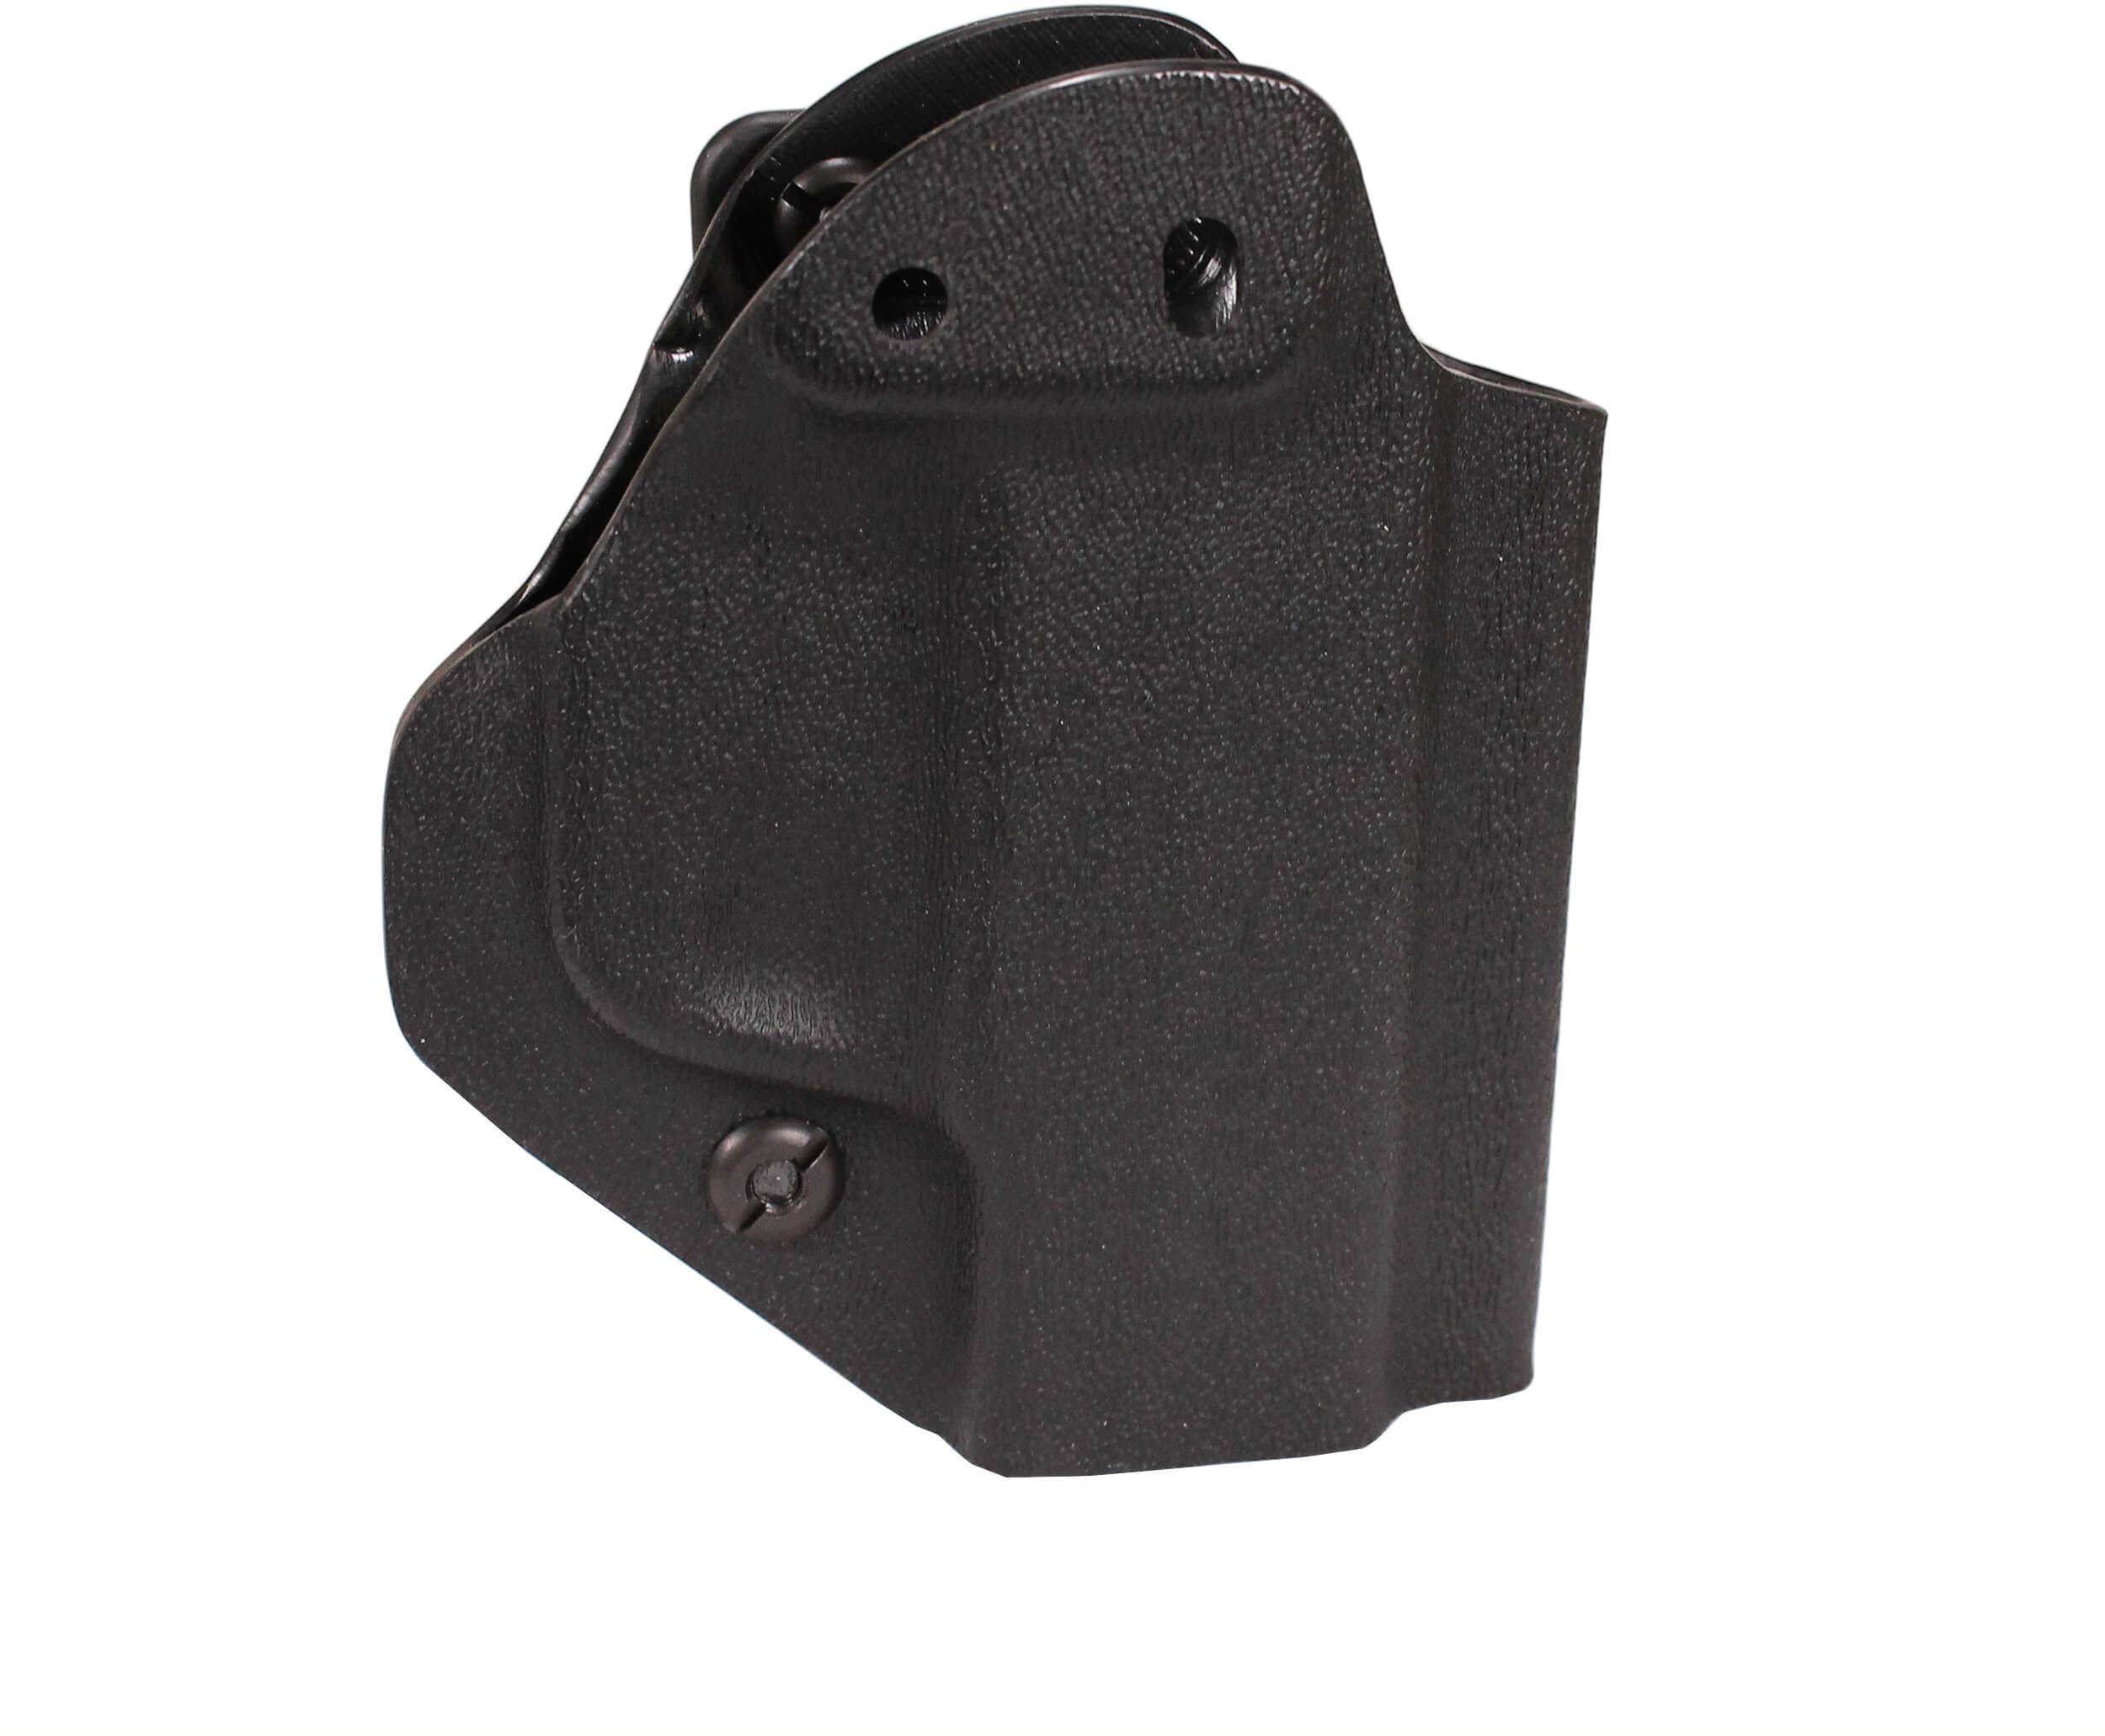 Mission First Tactical Inside Waistband Holster Ambidextrous Black Fits Ruger® LCP II Kydex Includes 1.5" Belt Attacheme